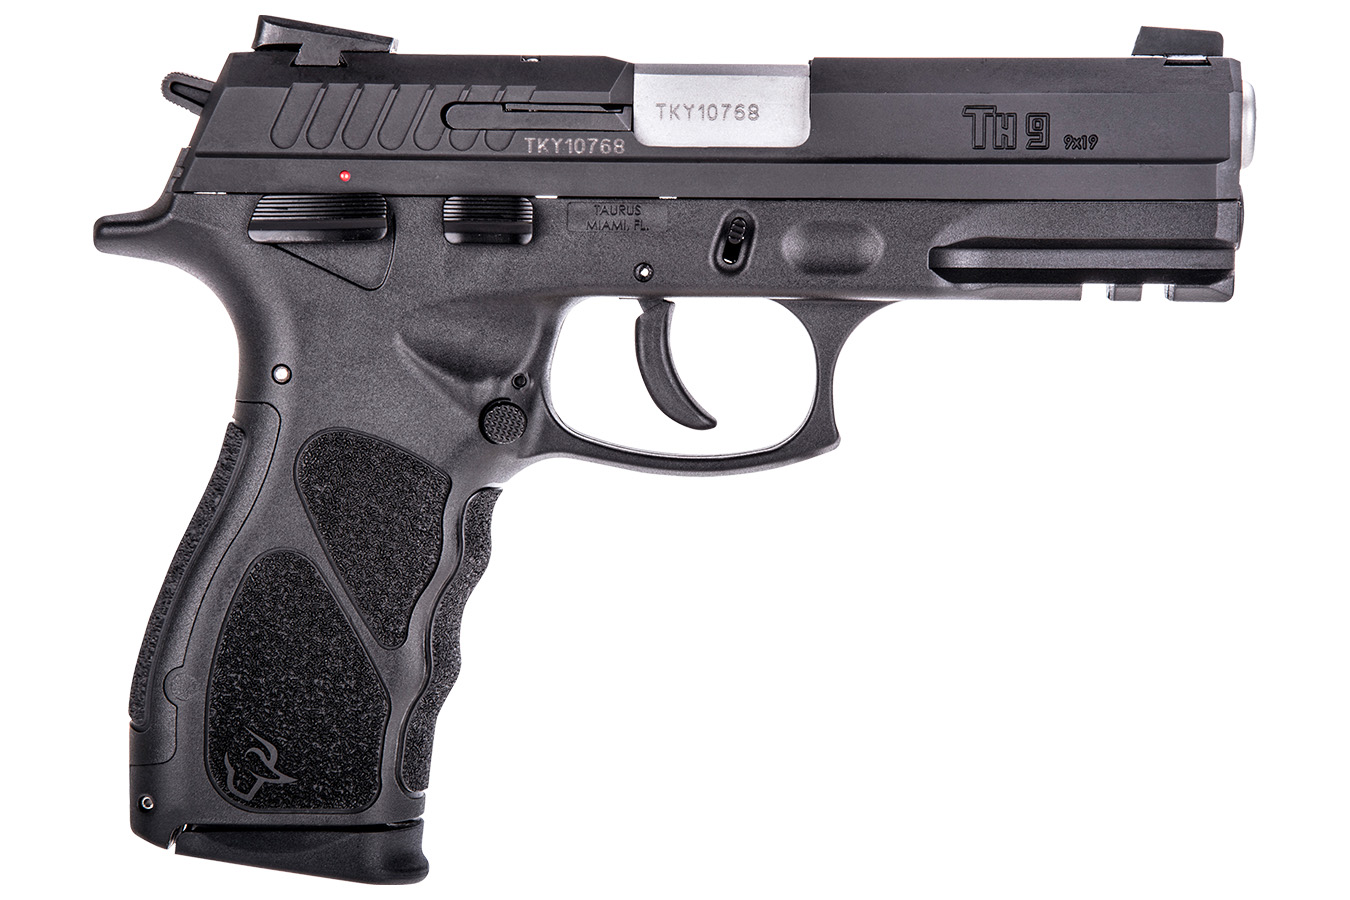 TAURUS TH9 9MM WITH AMBI THUMB SAFETY